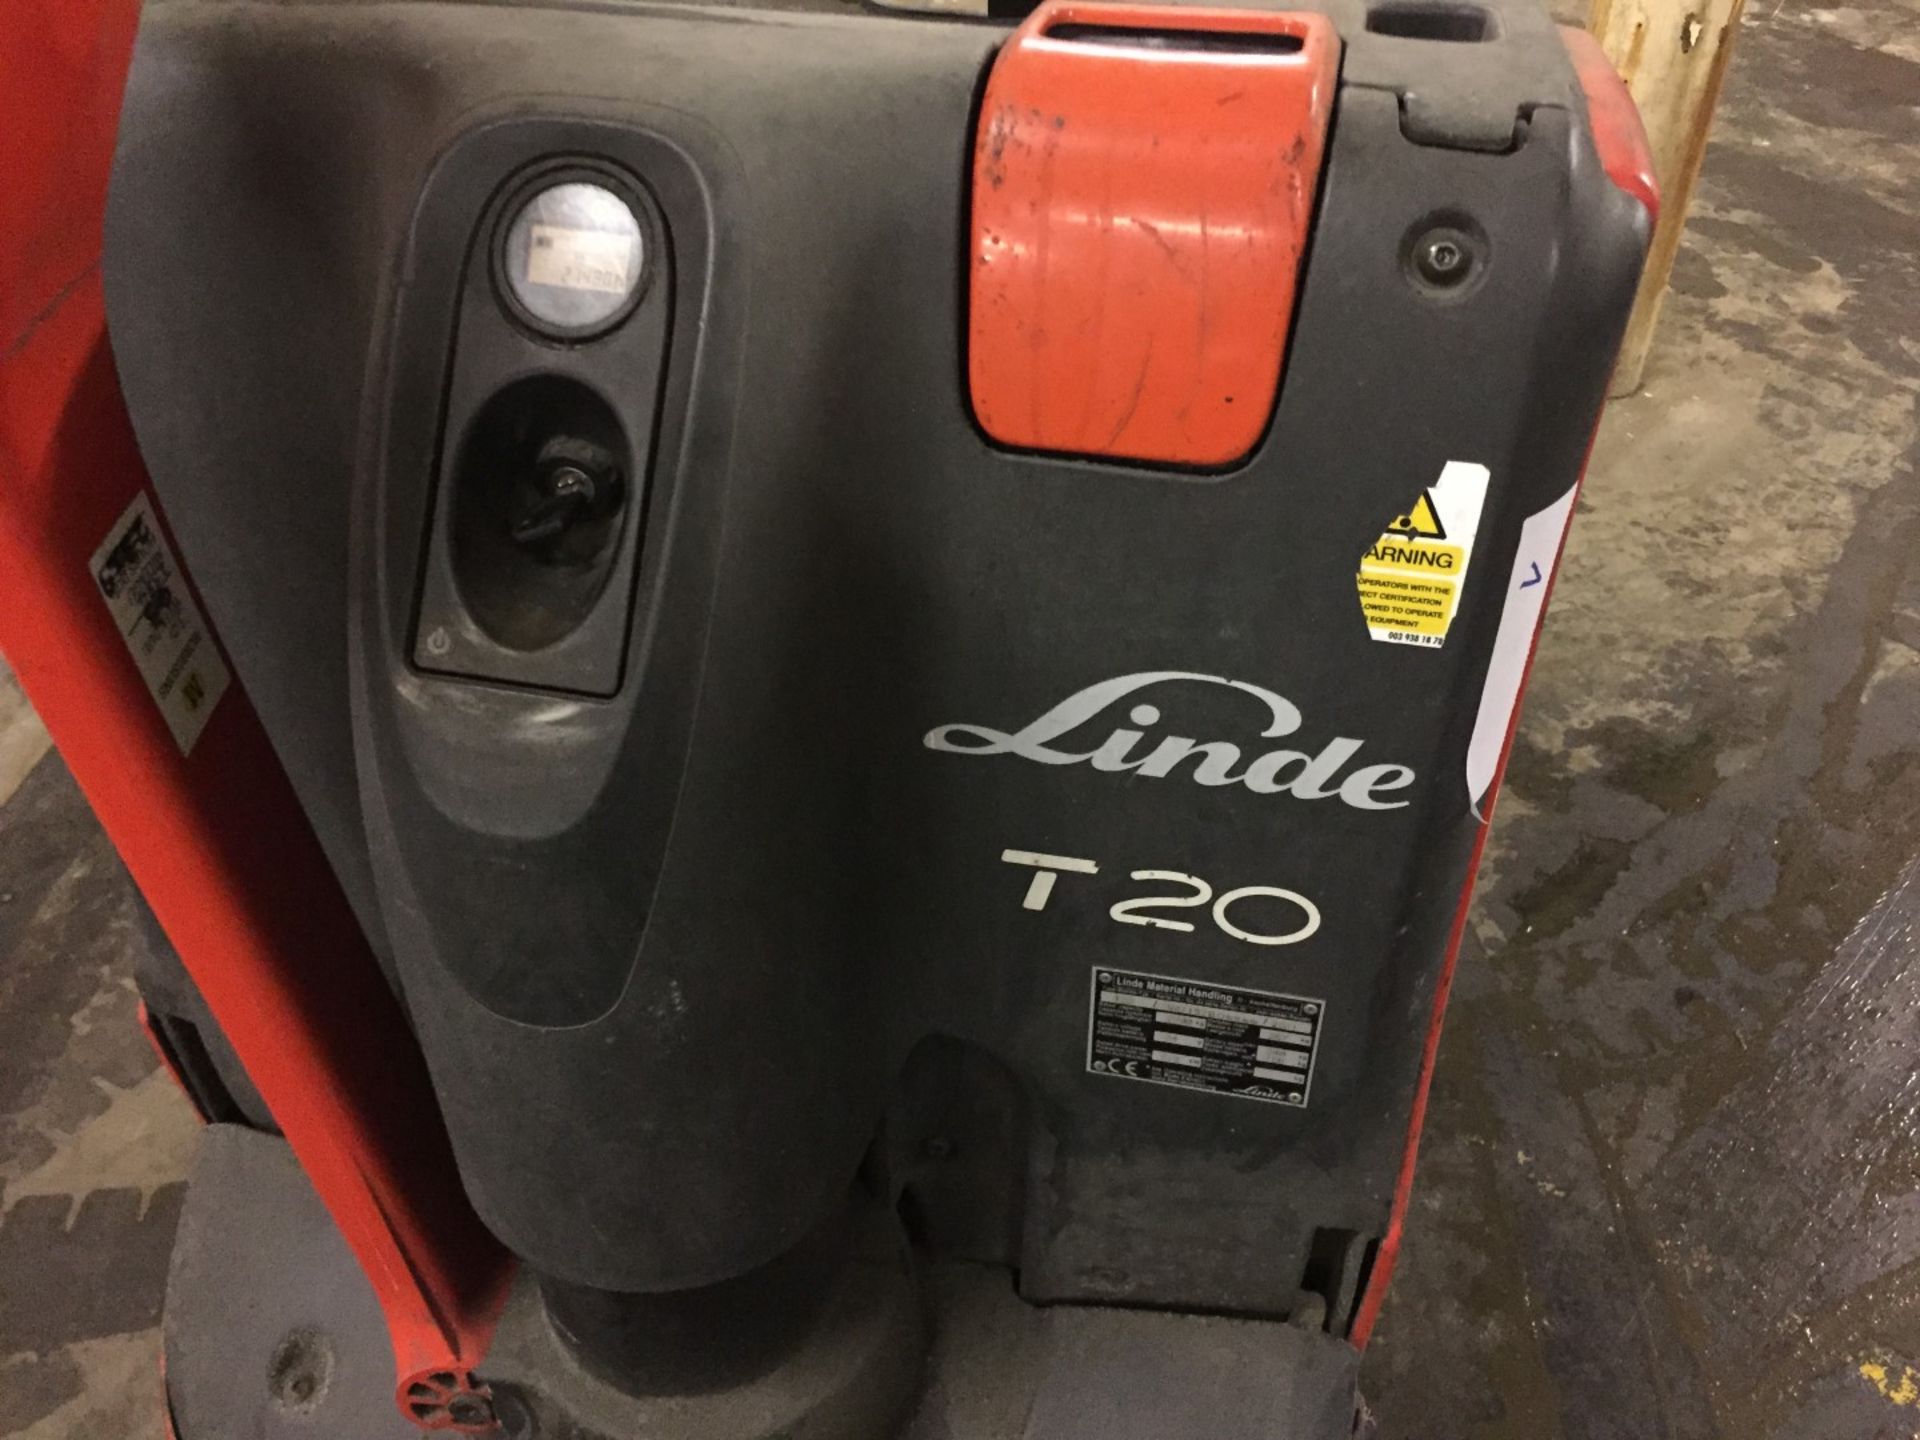 1 x Linde T20 Electric Pallet Truck - Tested and Working - Charger Included - CL007 - Ref: T20/1 - - Image 5 of 12